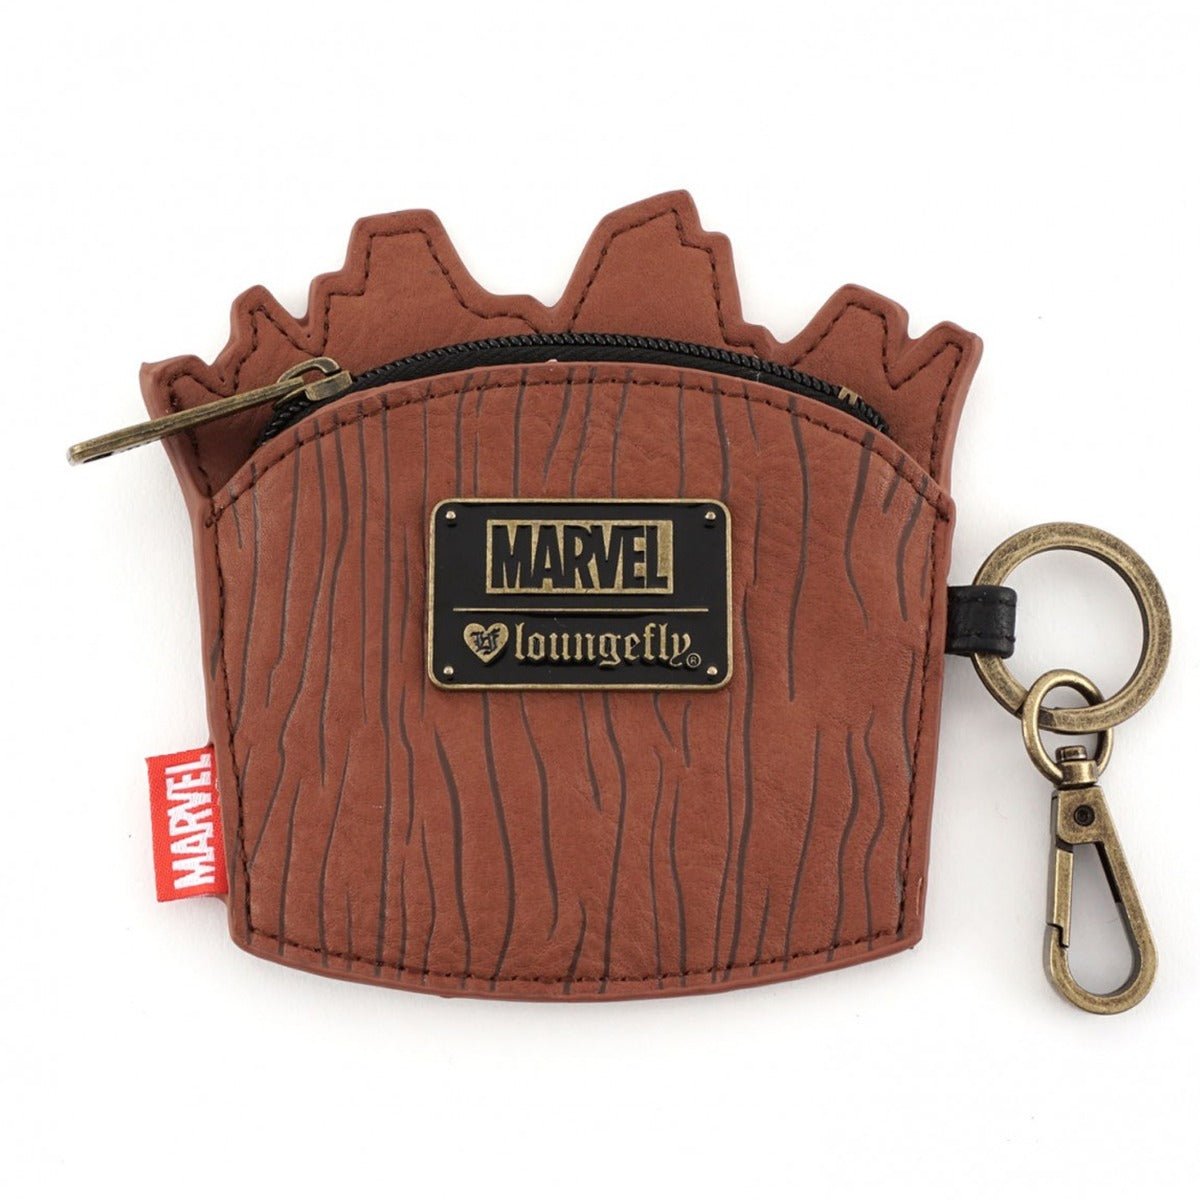 Loungefly x Marvel Groot Coin Purse - GeekCore